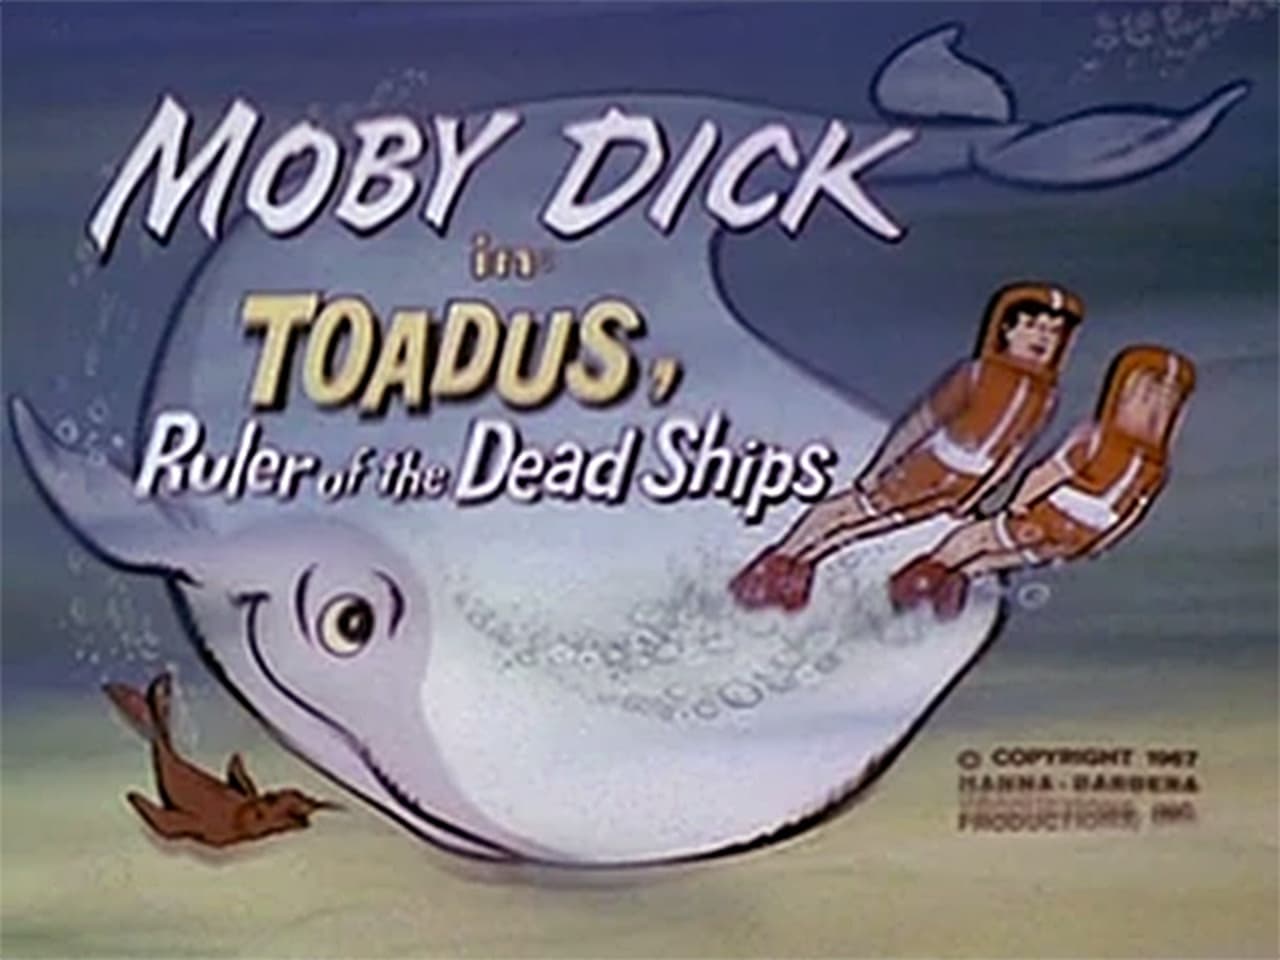 Toadus Ruler of the Dead Ships